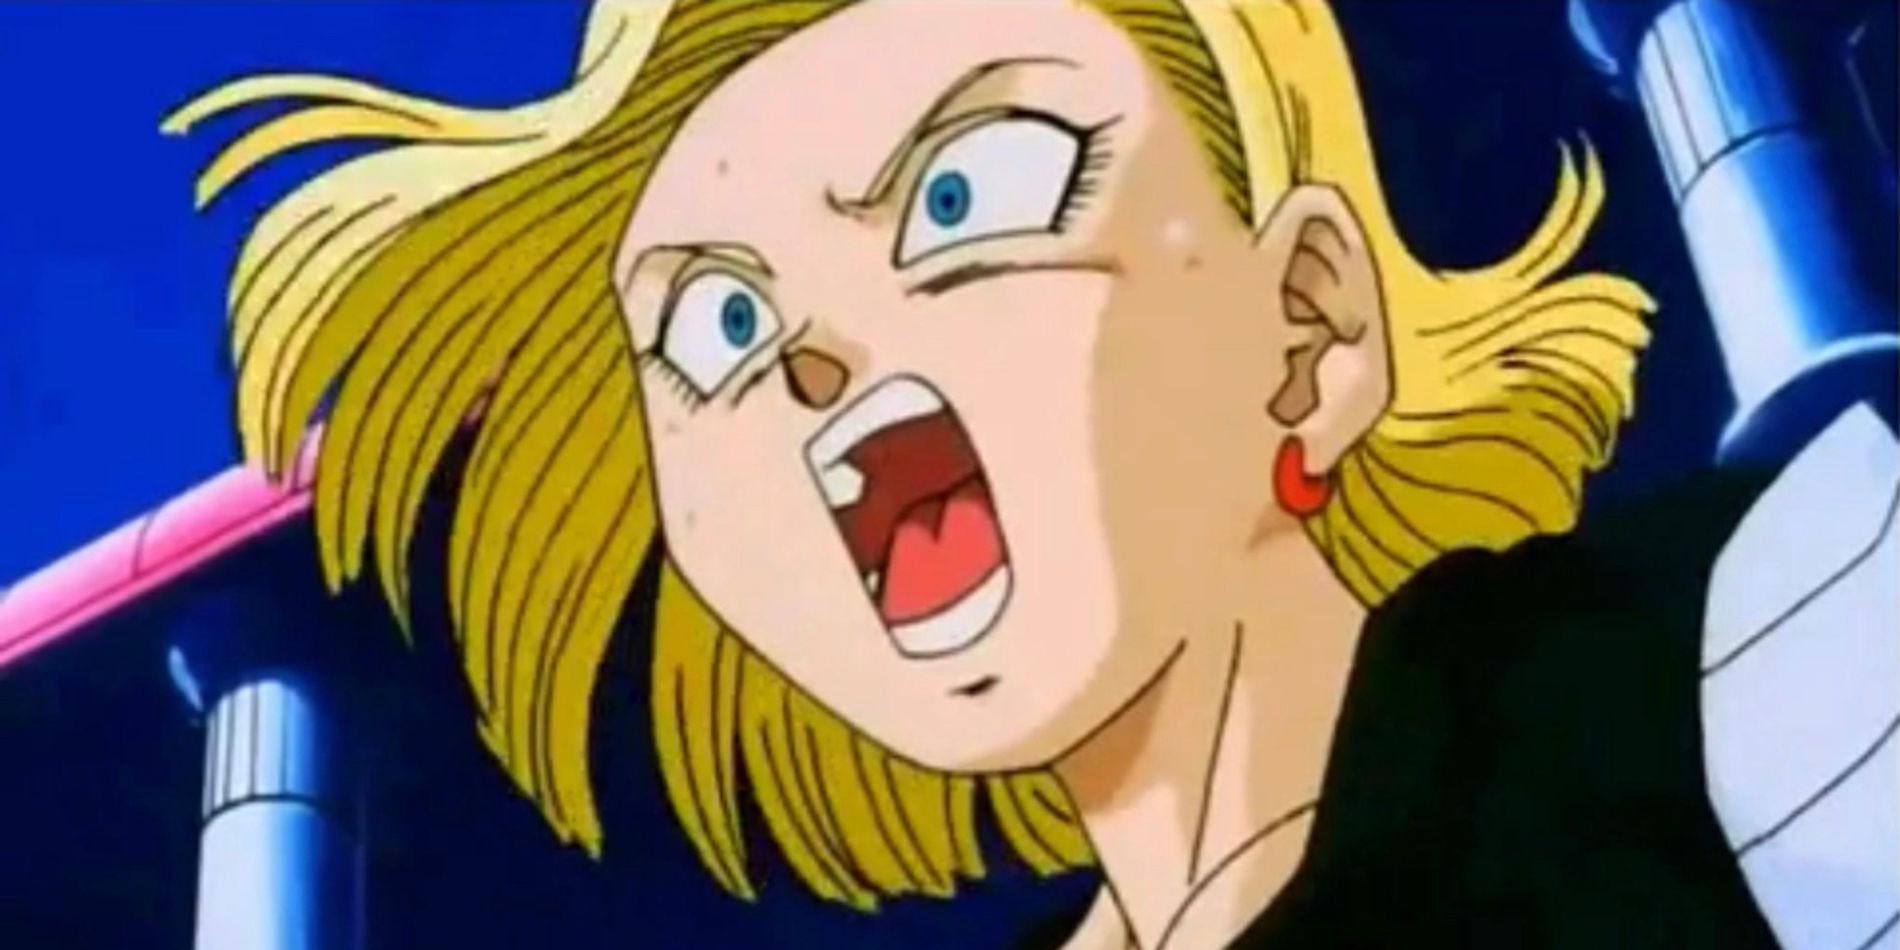 Android 18 gets surprised by Super Buu in Dragon Ball Z